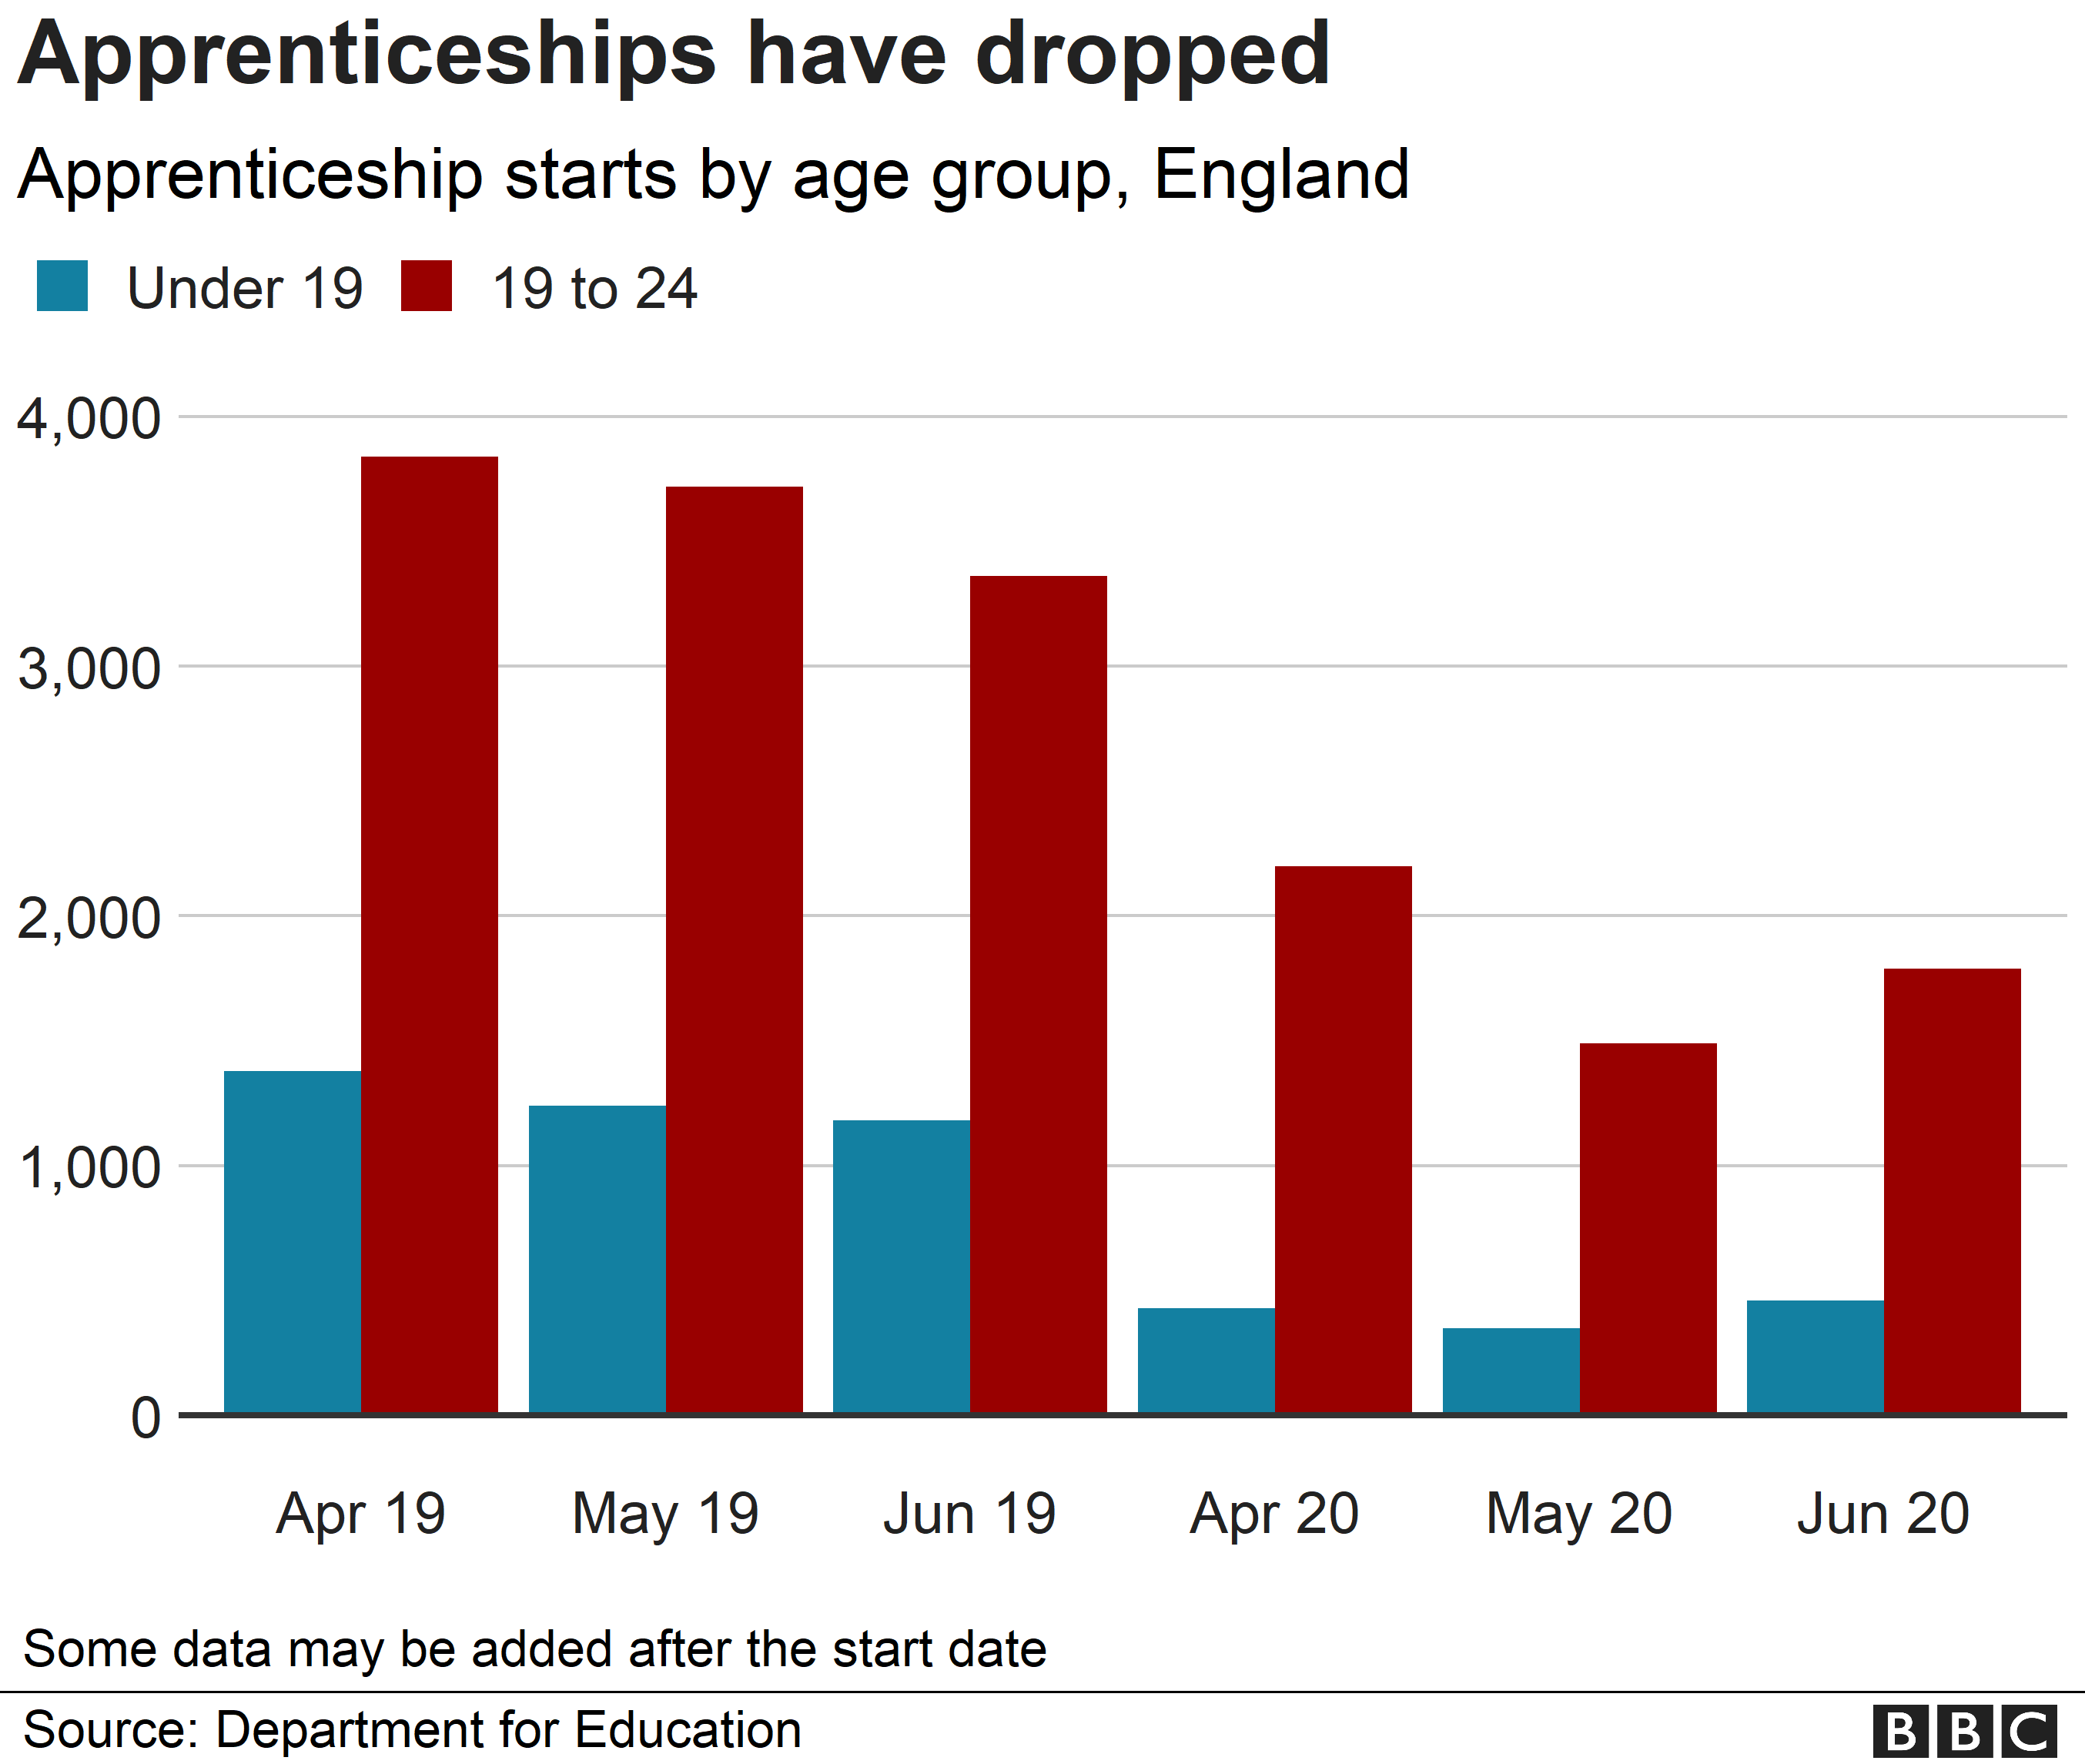 Chart showing monthly apprenticeship starts